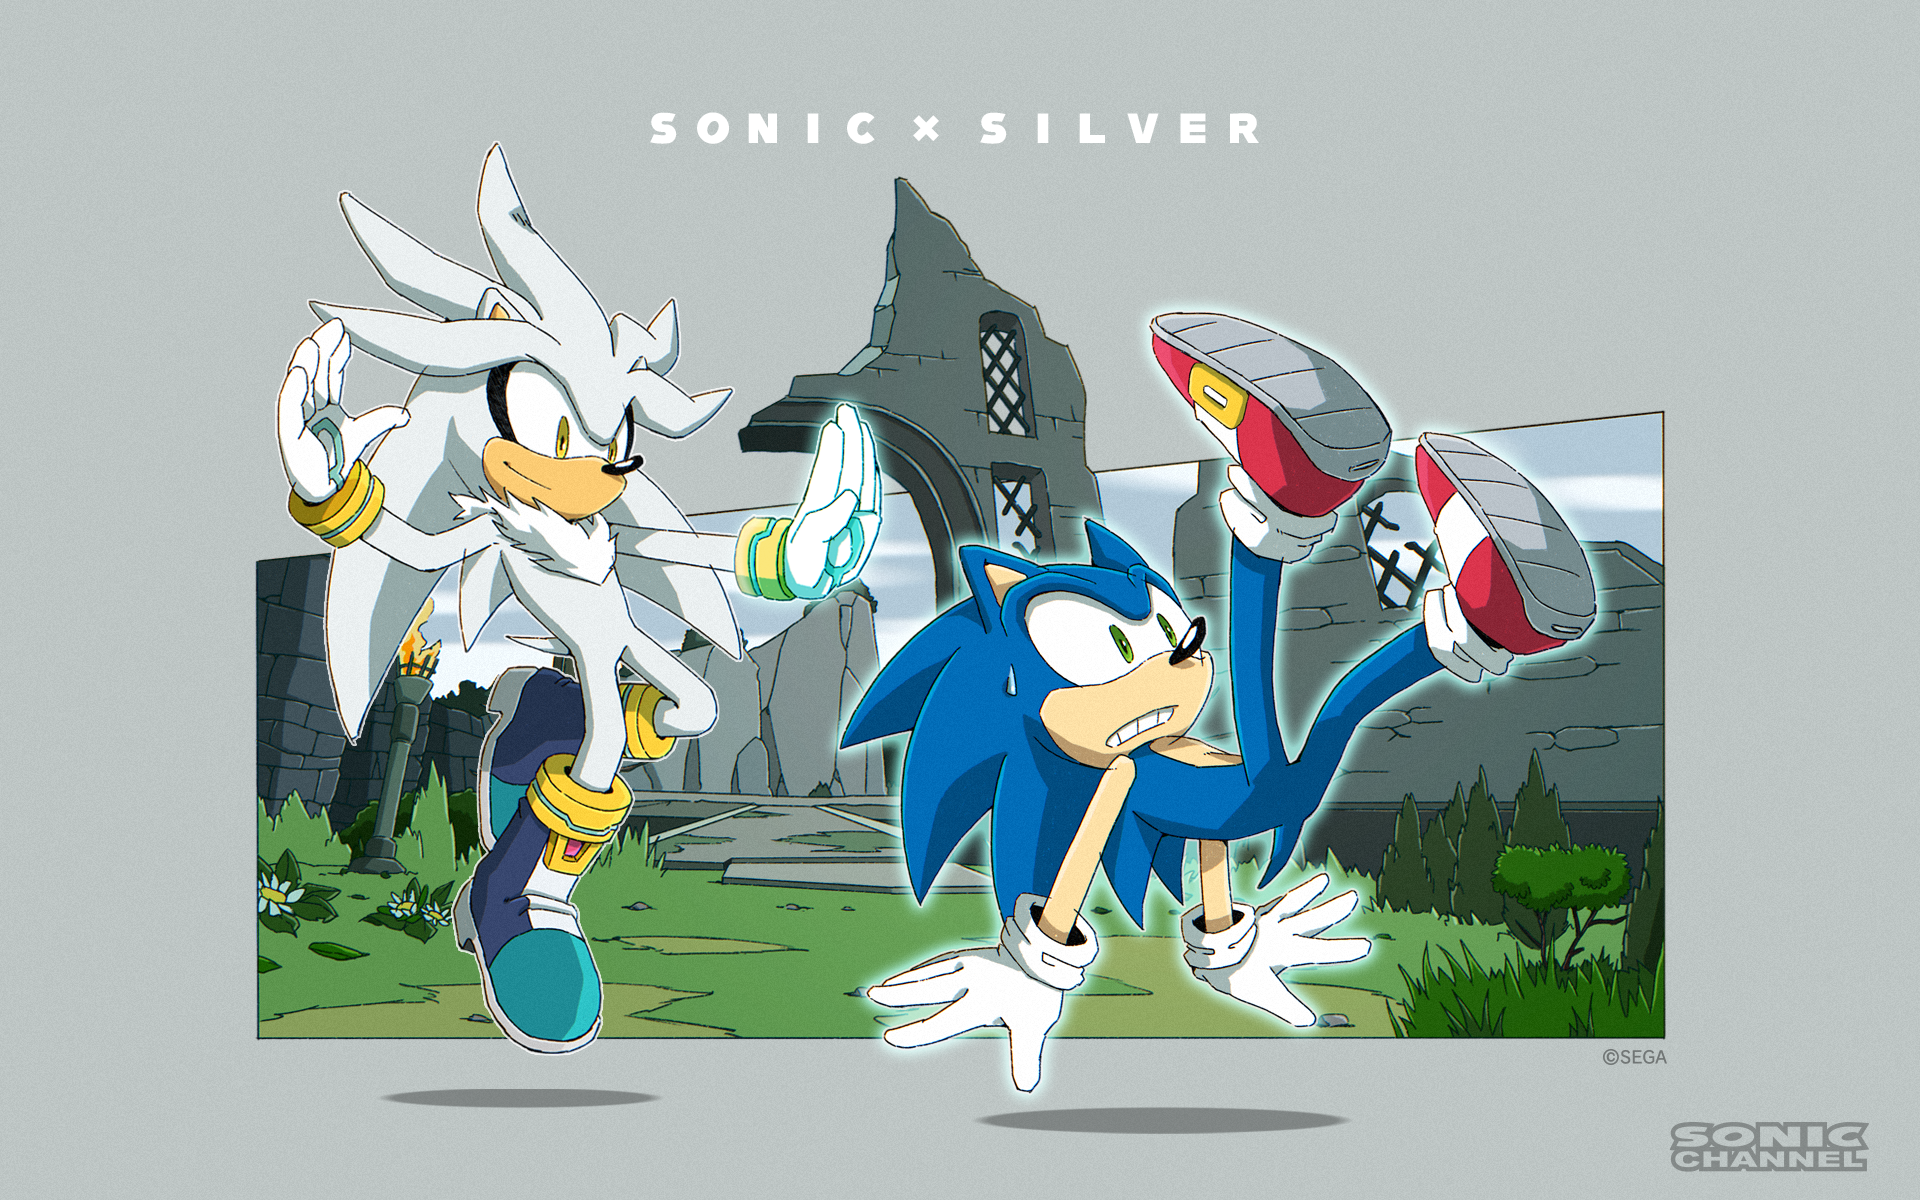 General 1920x1200 Sonic Sonic the Hedgehog video game art PC gaming comic art October Silver the Hedgehog